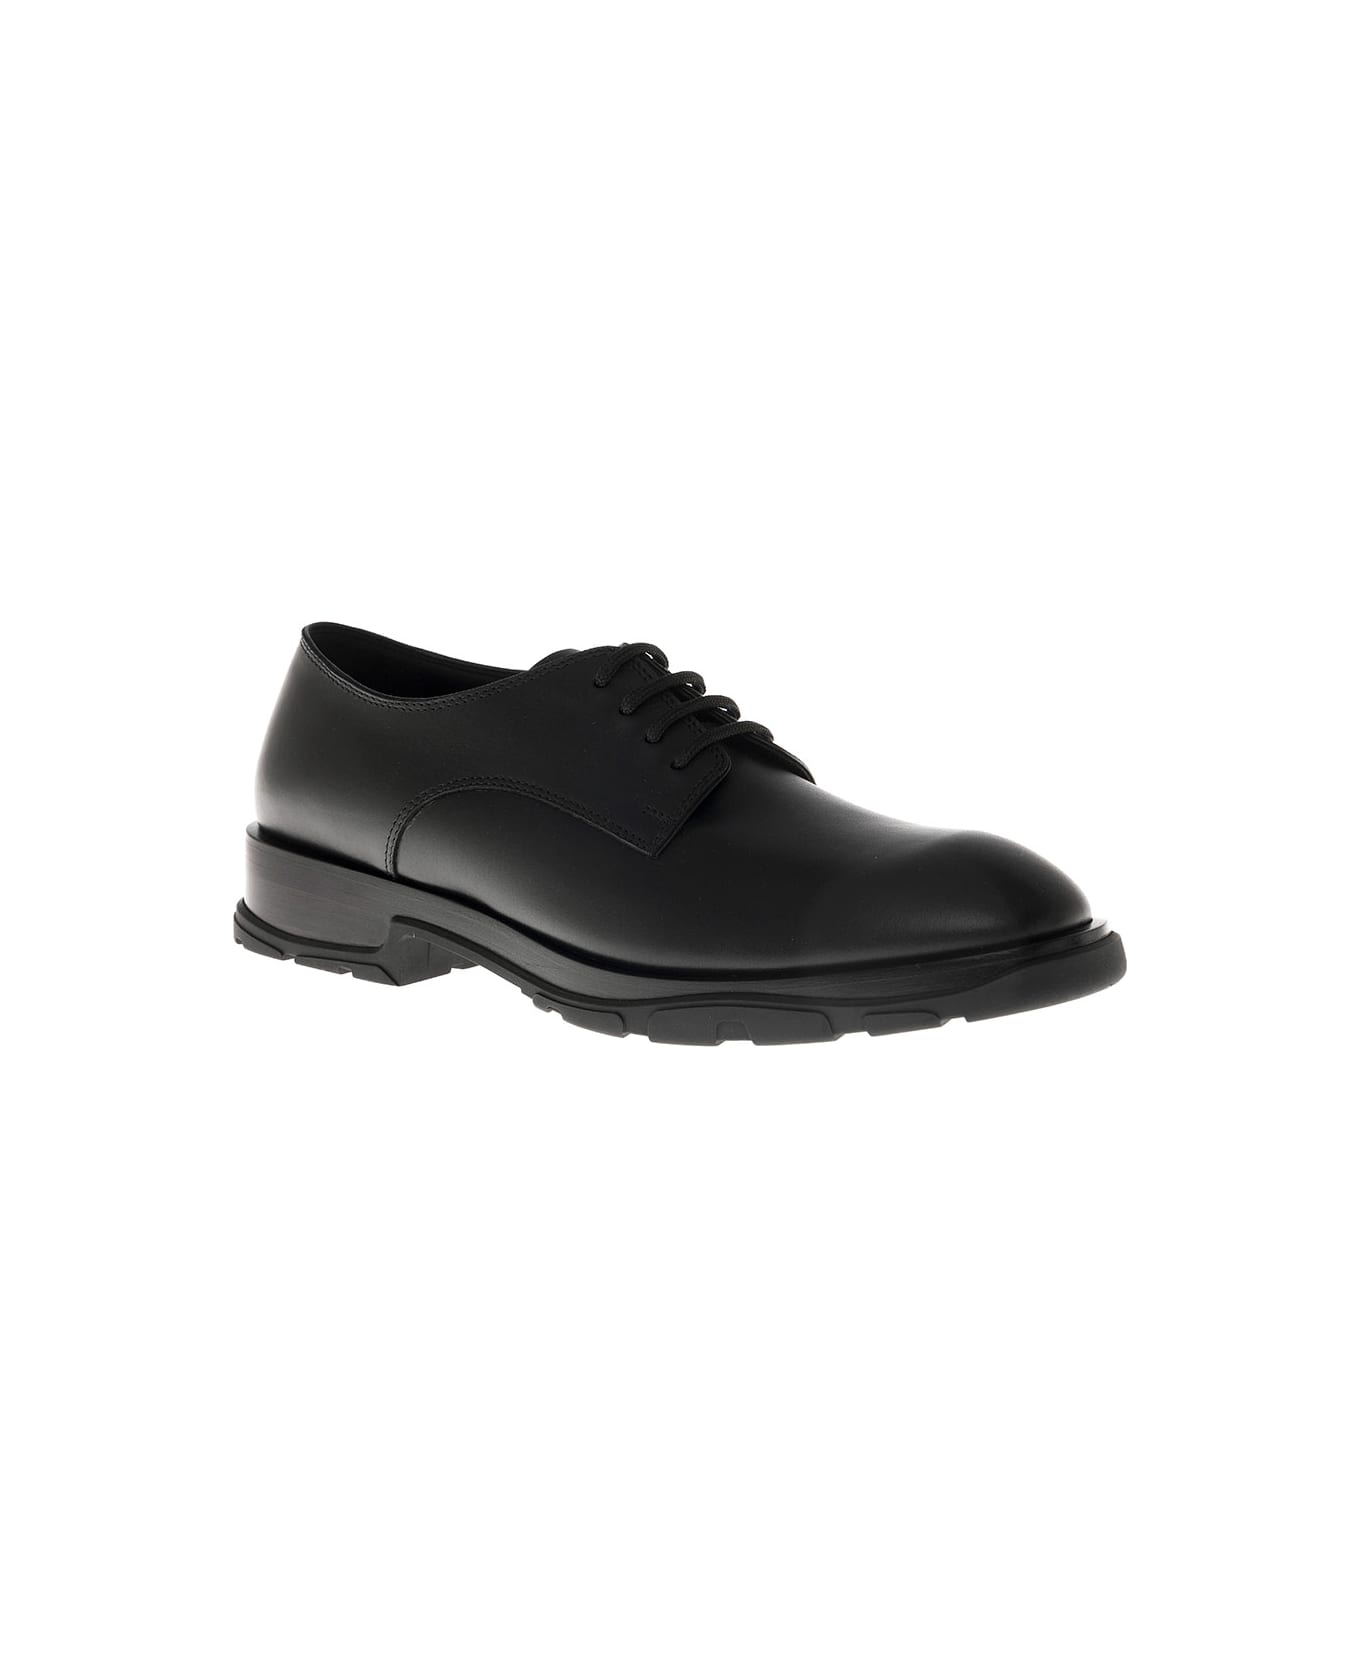 Alexander McQueen Black Leather Loafers With Textured Sole - Black